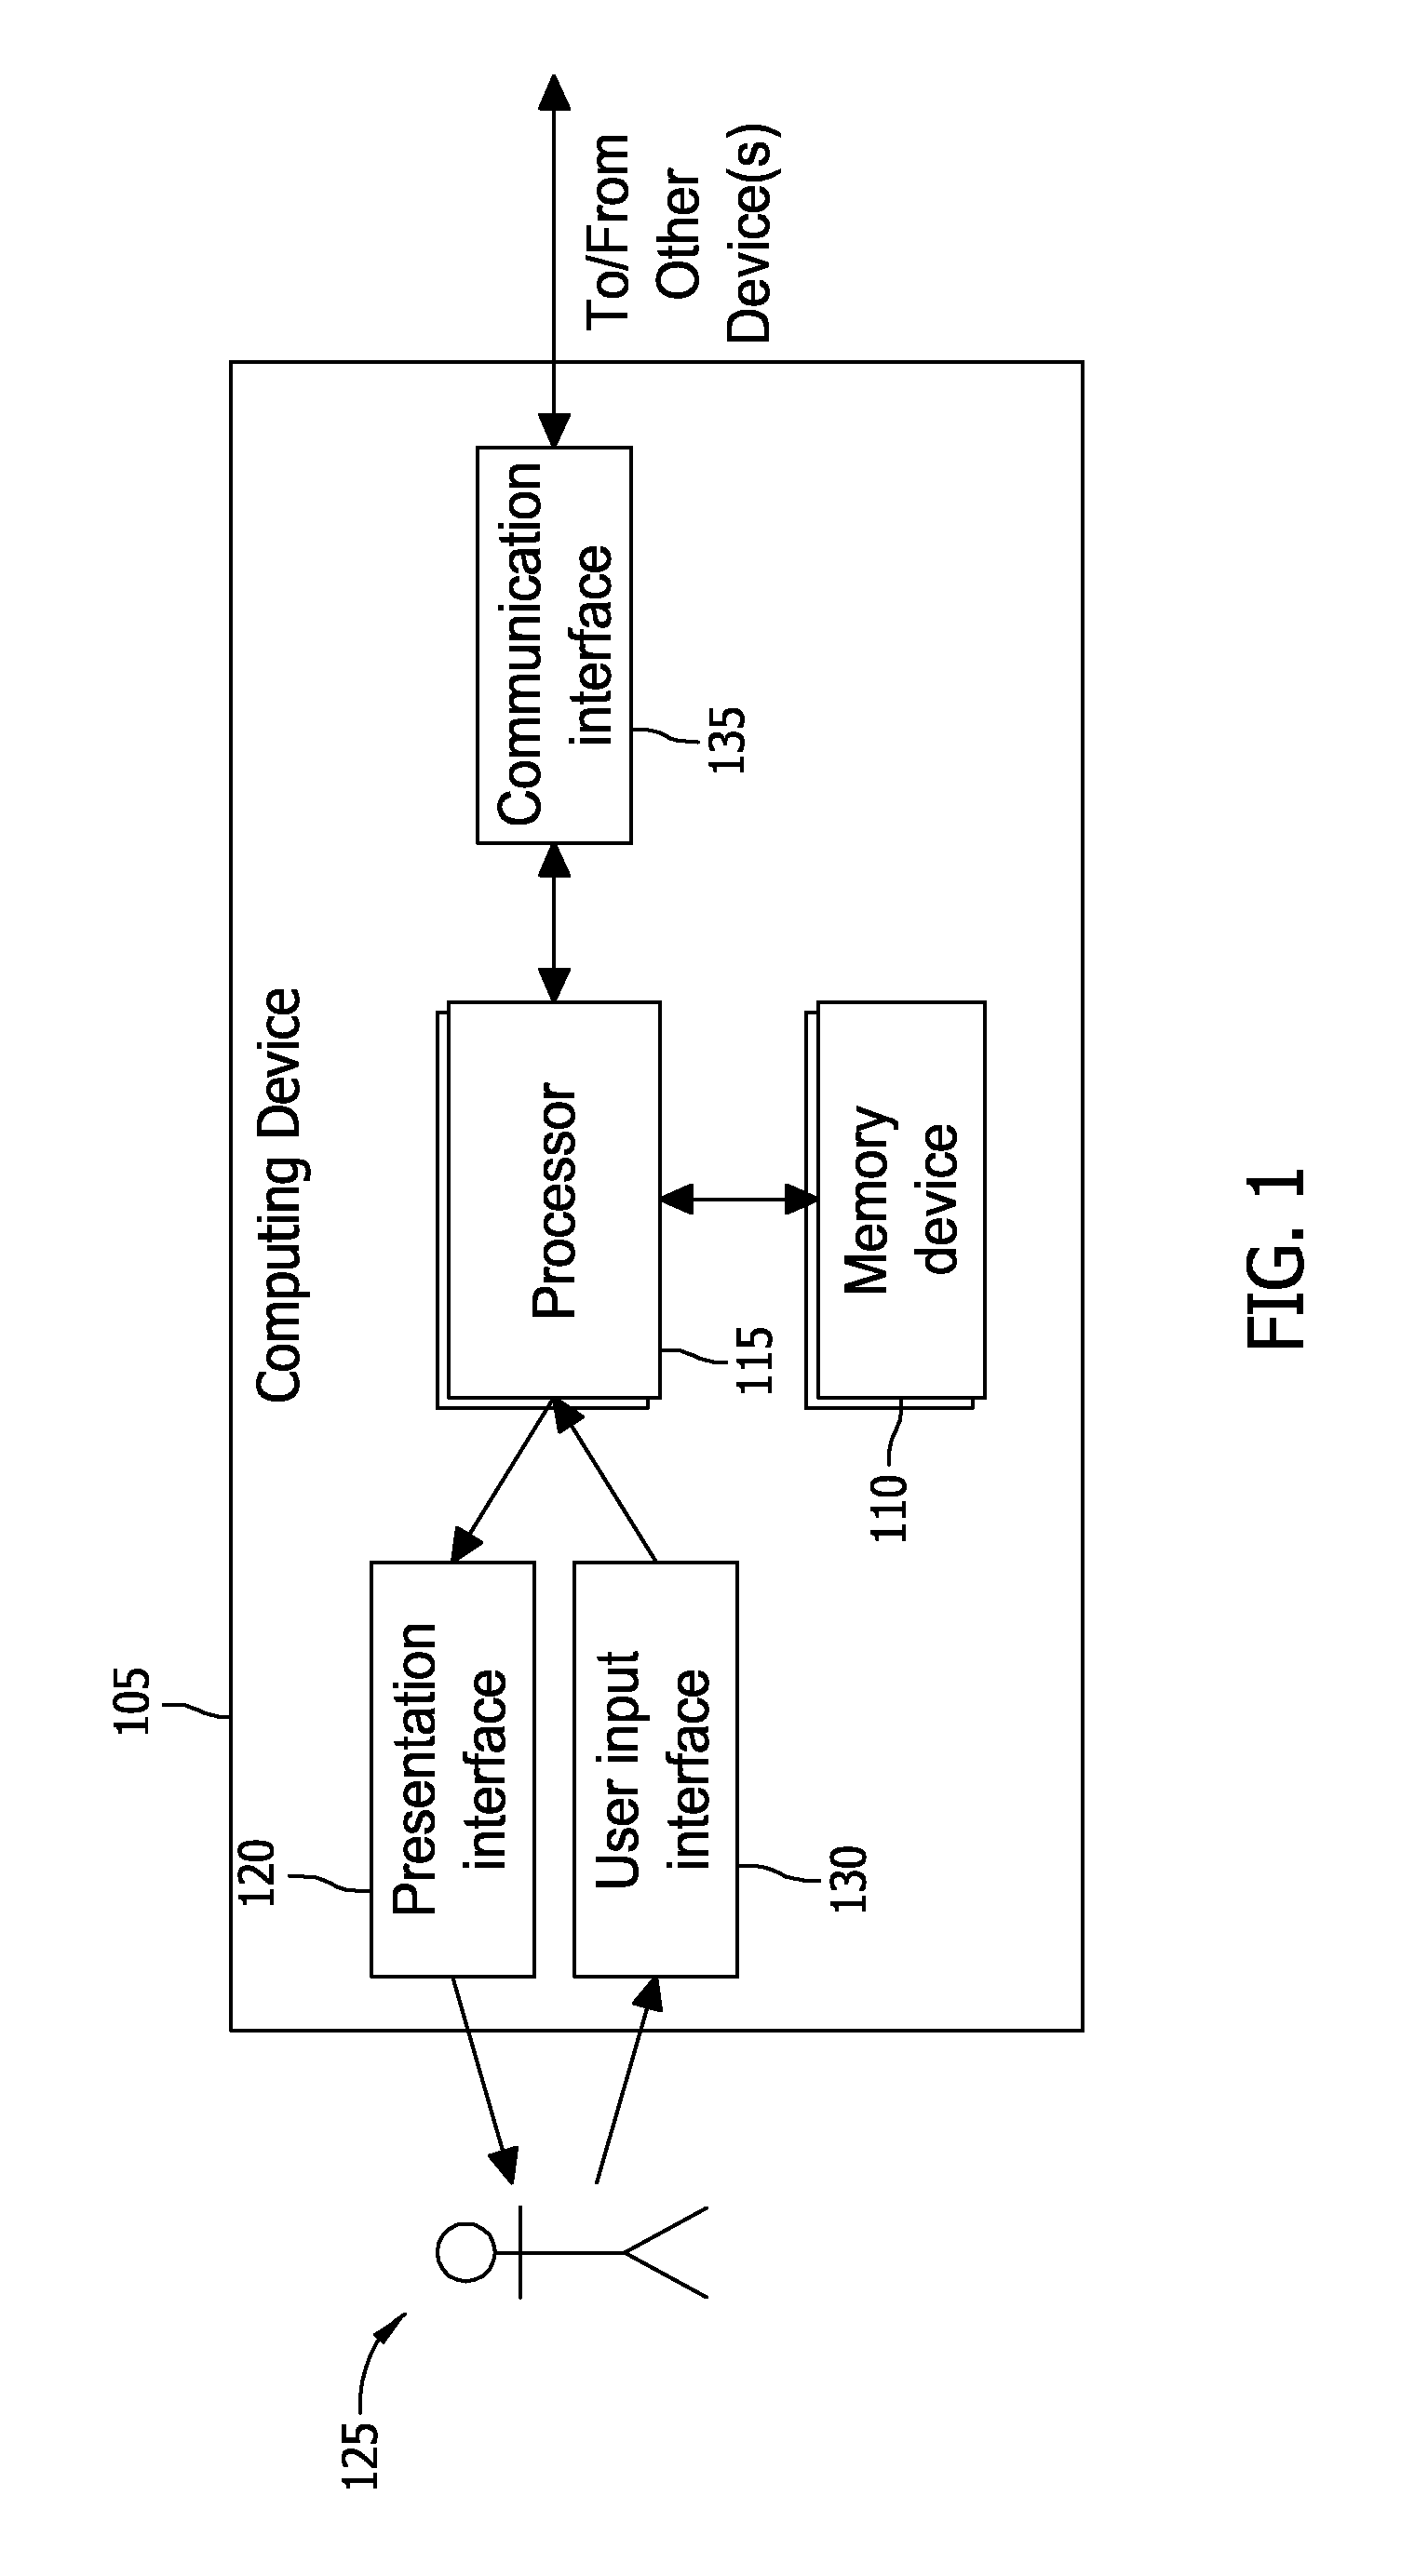 Auxiliary electric power system and method of regulating voltages of the same